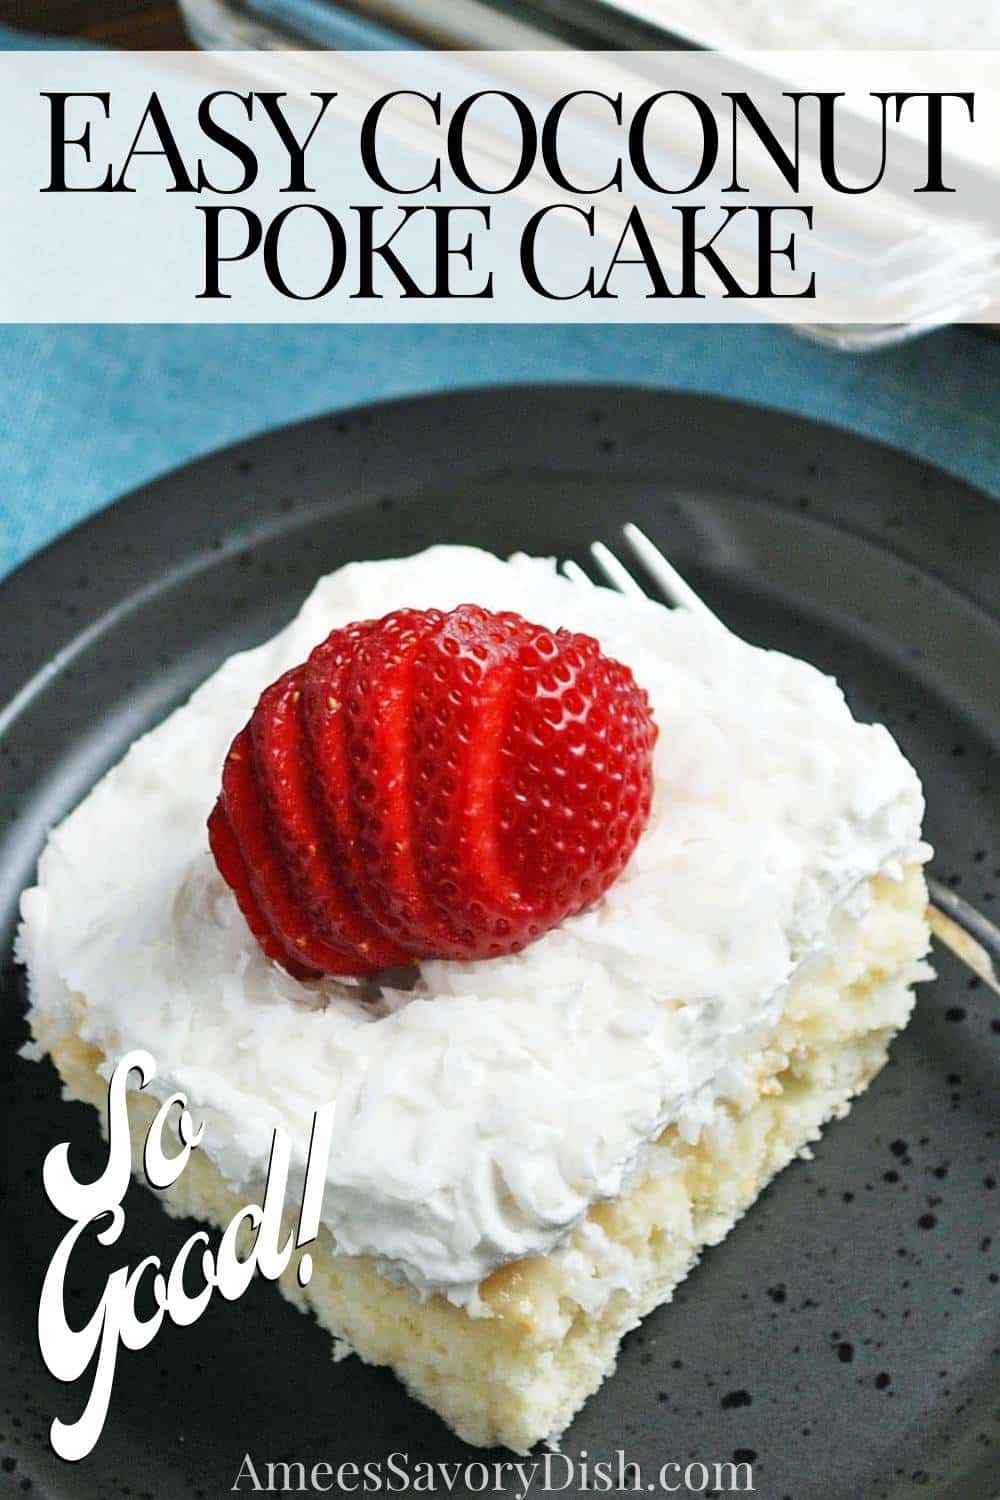 My mother has been making this coconut poke cake recipe for years.  It brings back special memories from my childhood.  It's a quick and easy cake recipe made with boxed white cake mix, frozen coconut, whole milk, sugar, eggs, vanilla, and frozen whipped topping. #coconutcake #iceboxcake #easycoconutcake via @Ameessavorydish